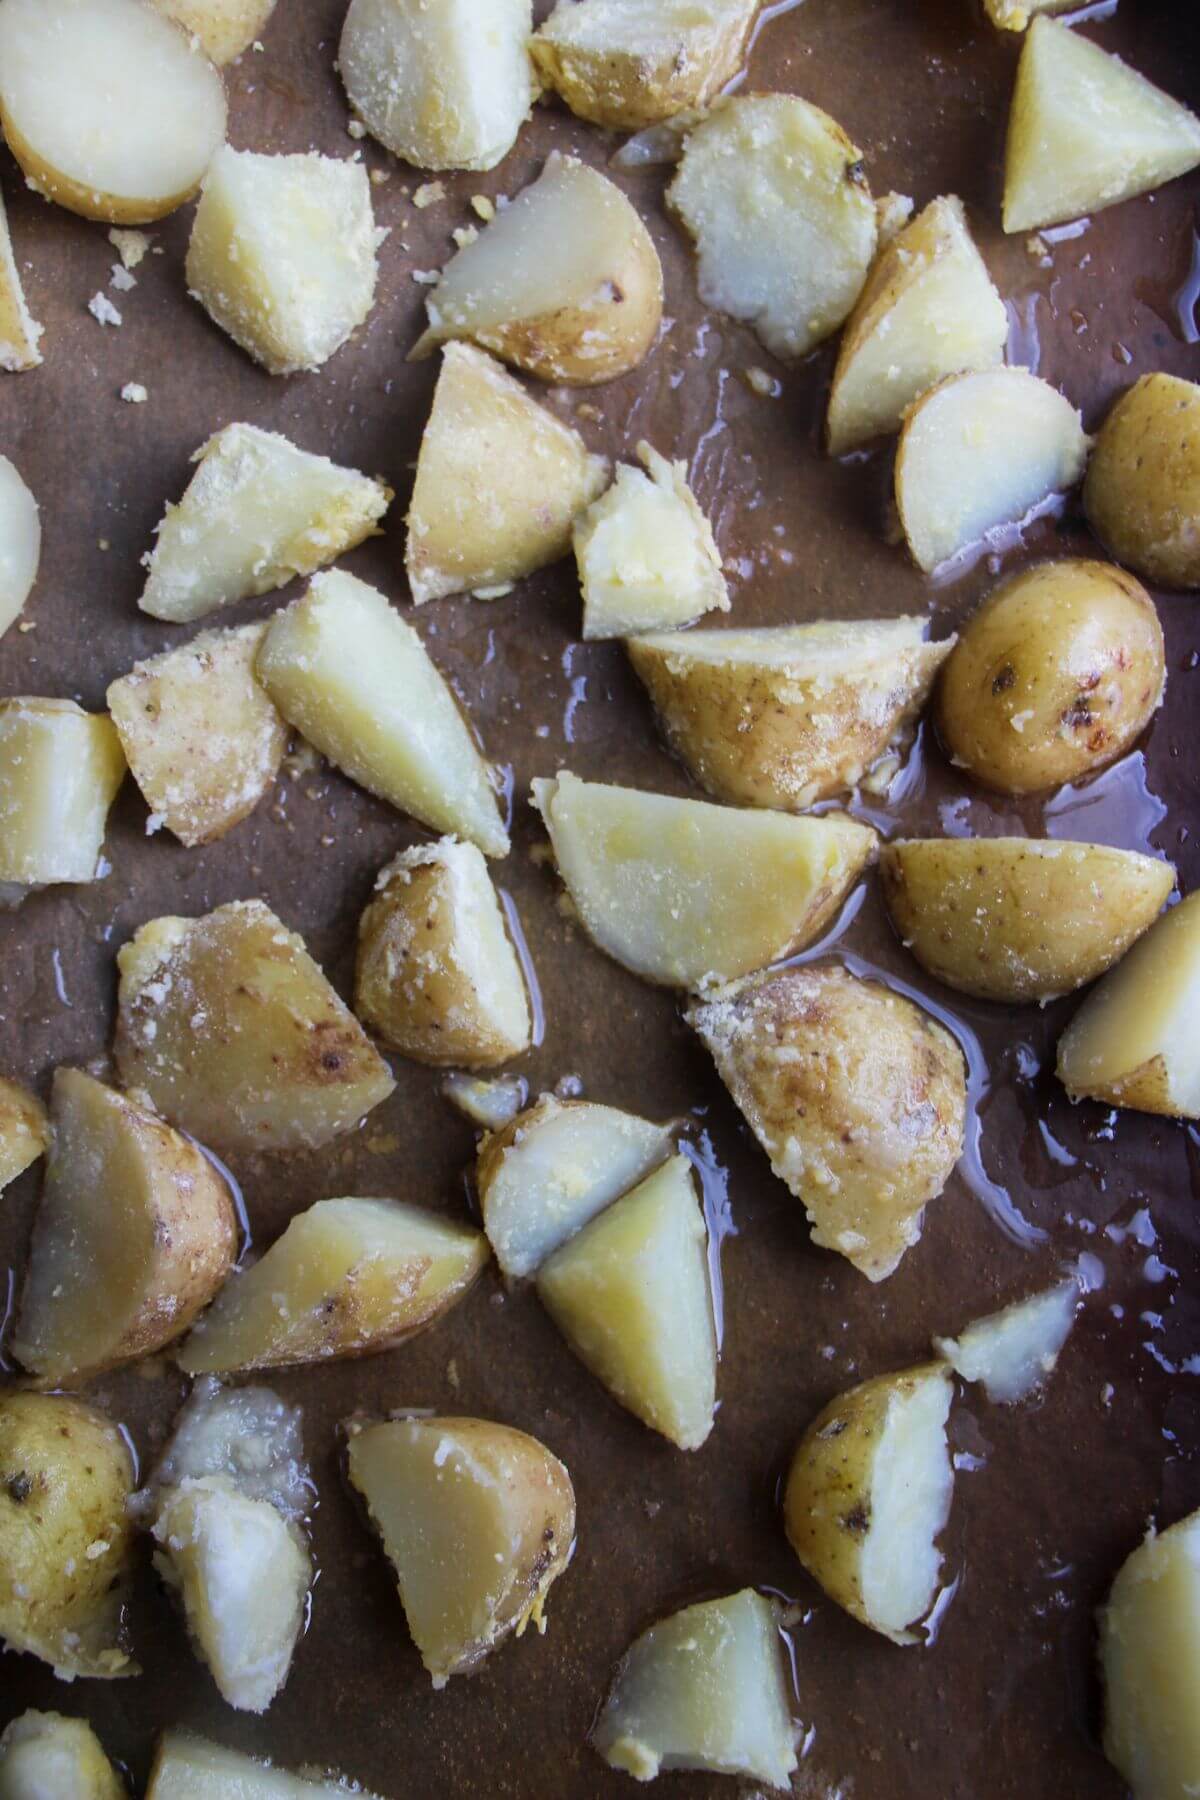 Par-boiled potatoes laid out on a baking paper lined oven tray.